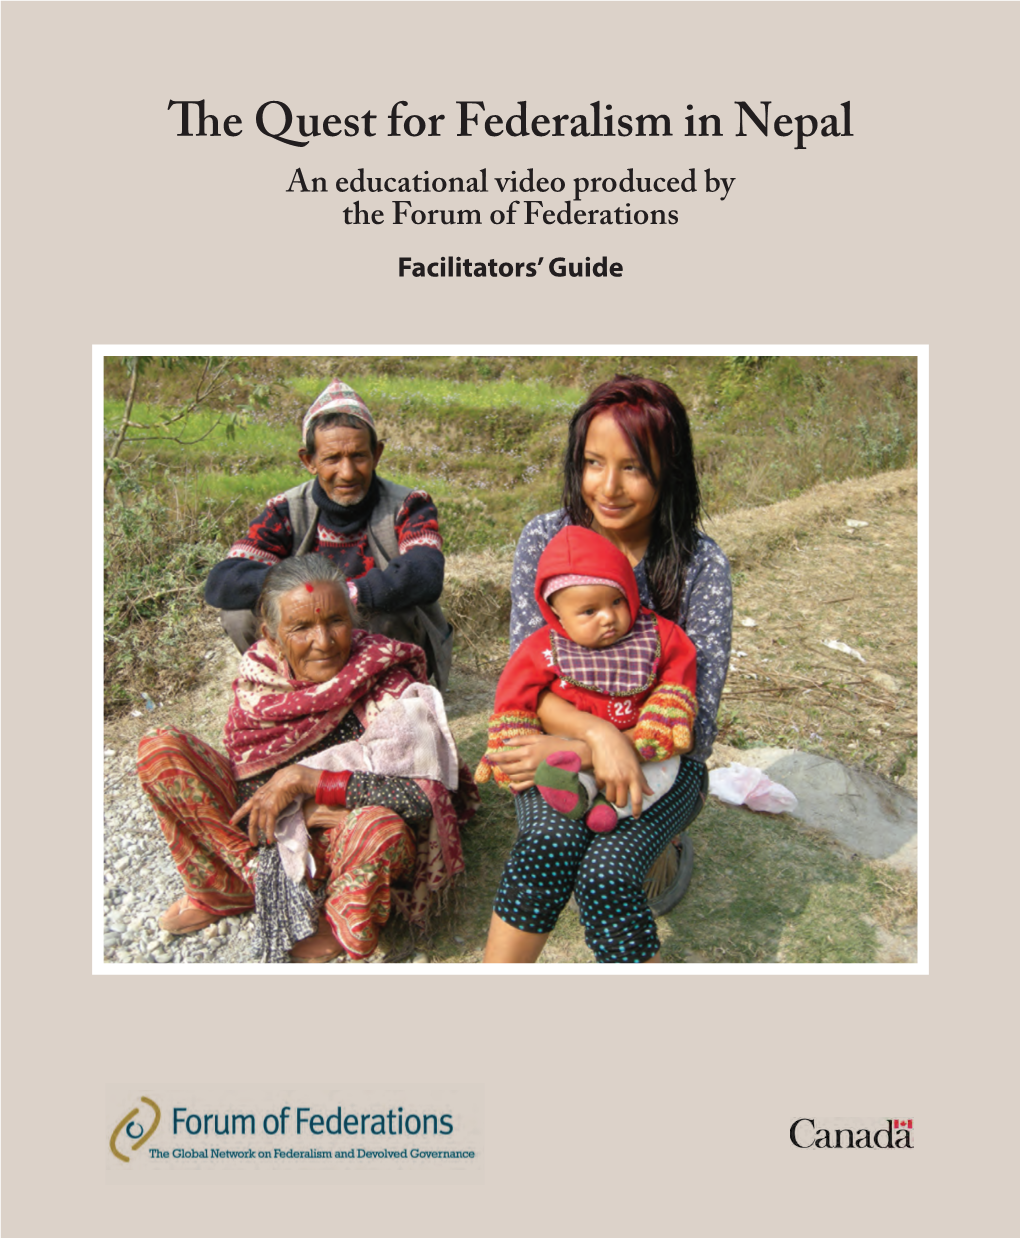 The Quest for Federalism in Nepal